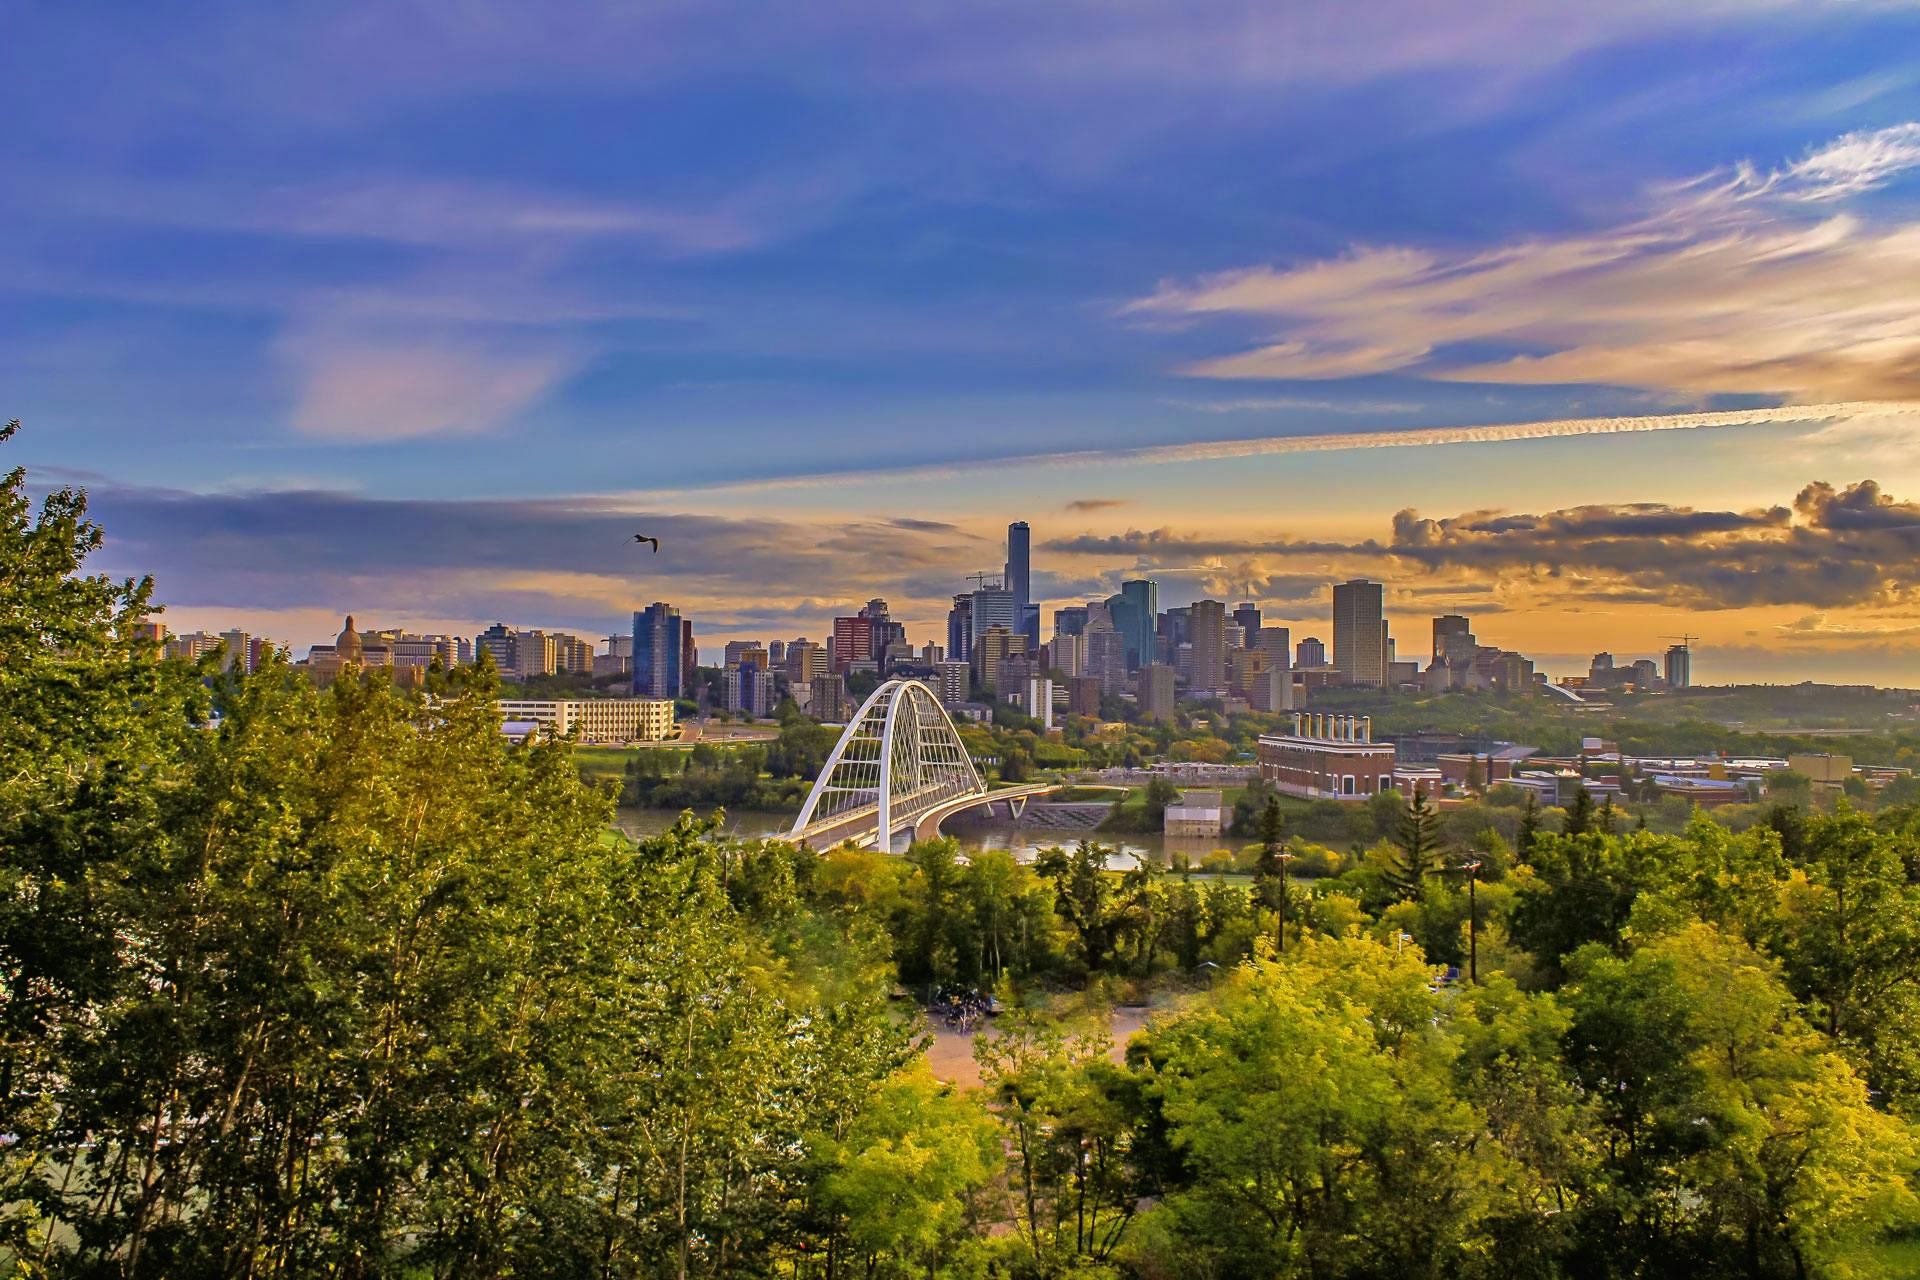 Skyline view of Edmonton, Canada, with trees and a bridge in the foreground